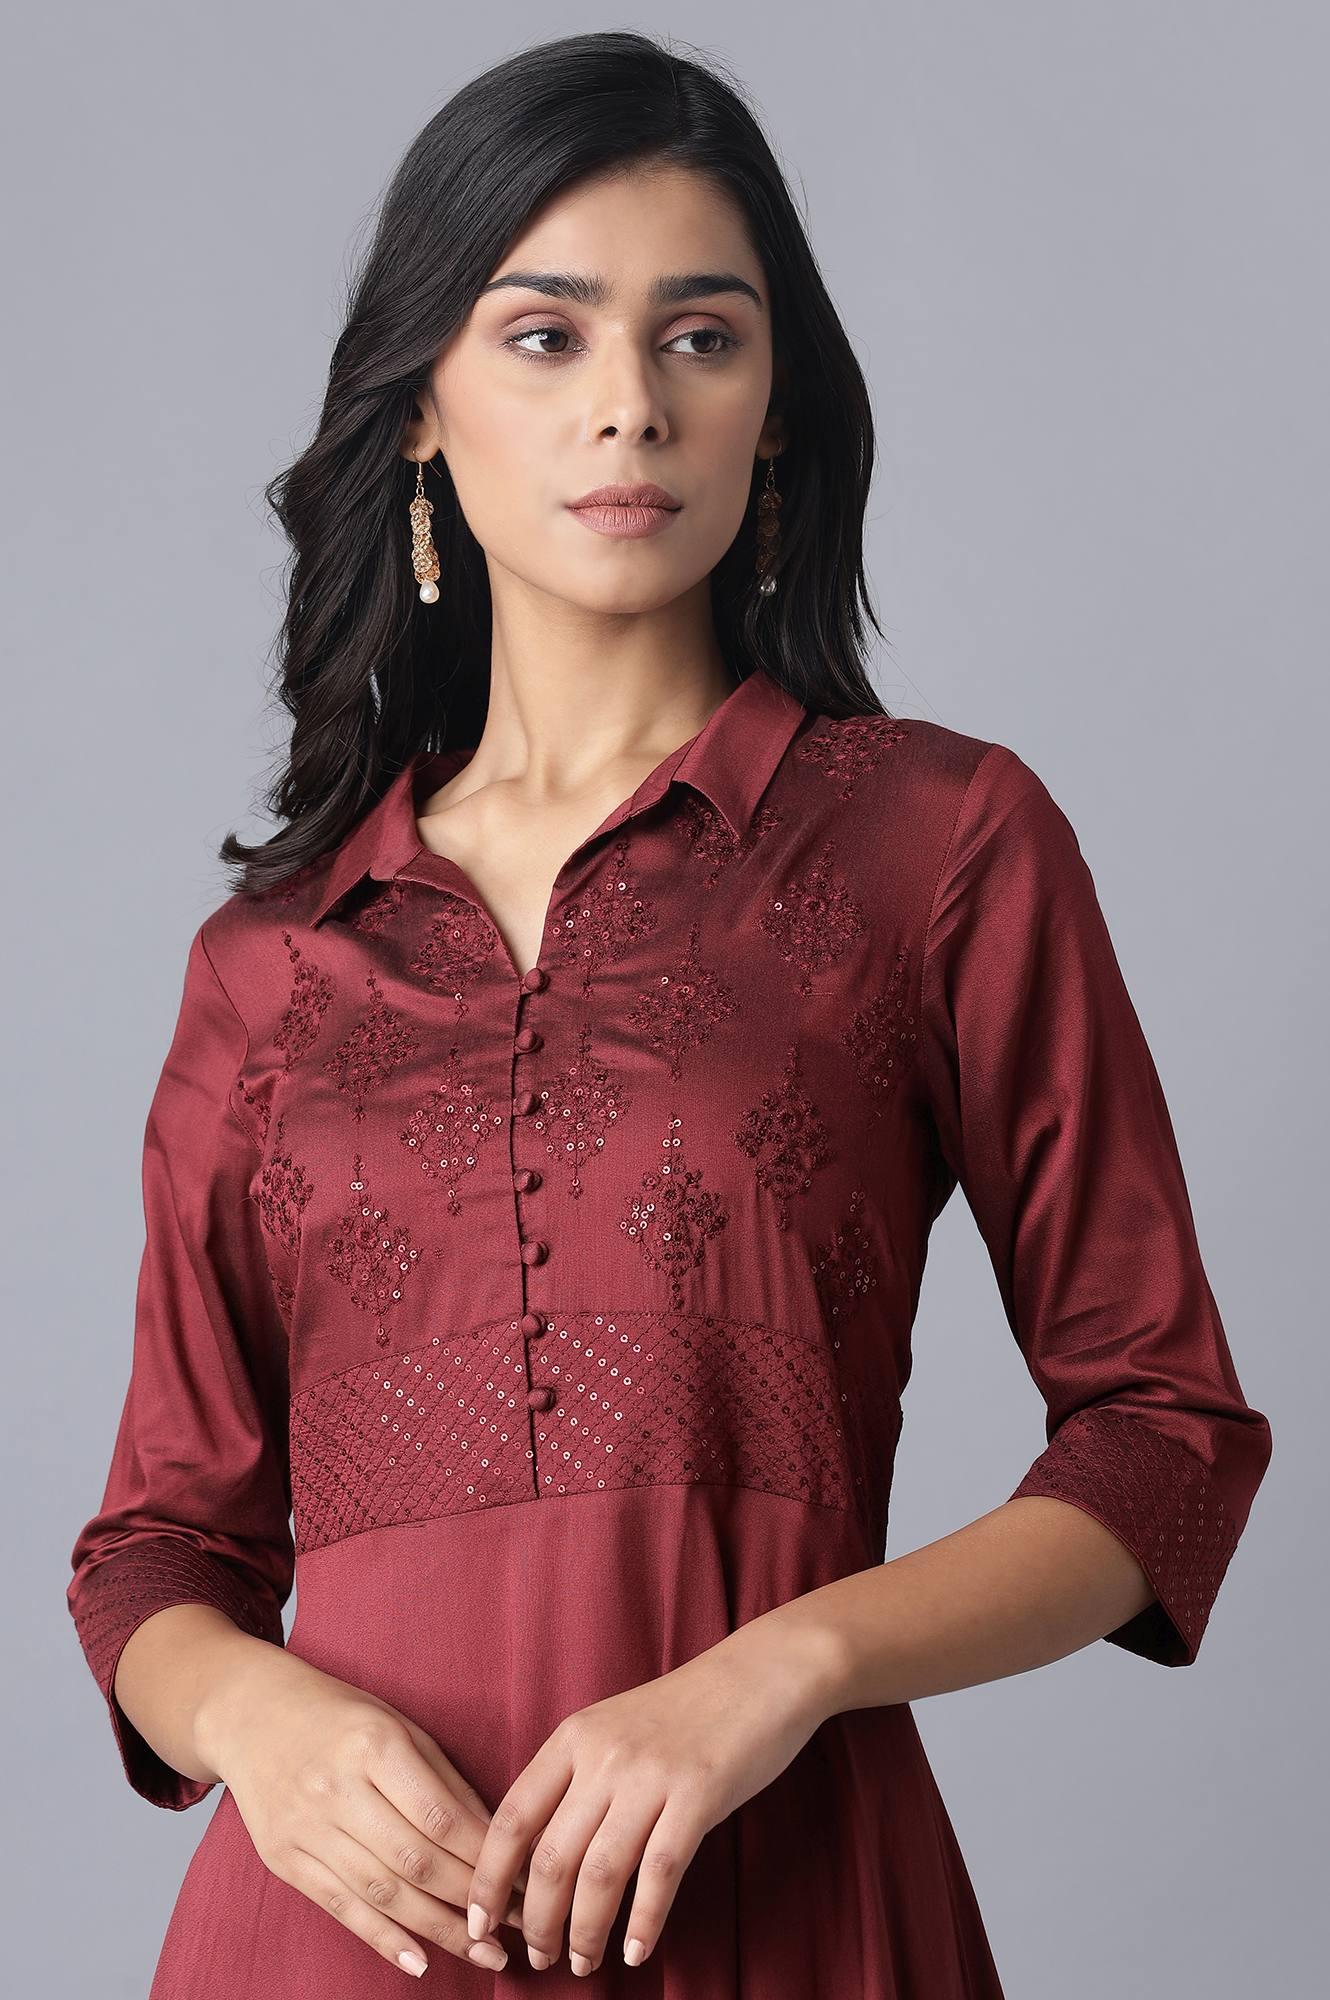 Red Embroidered Flared Shirt Dress - wforwoman